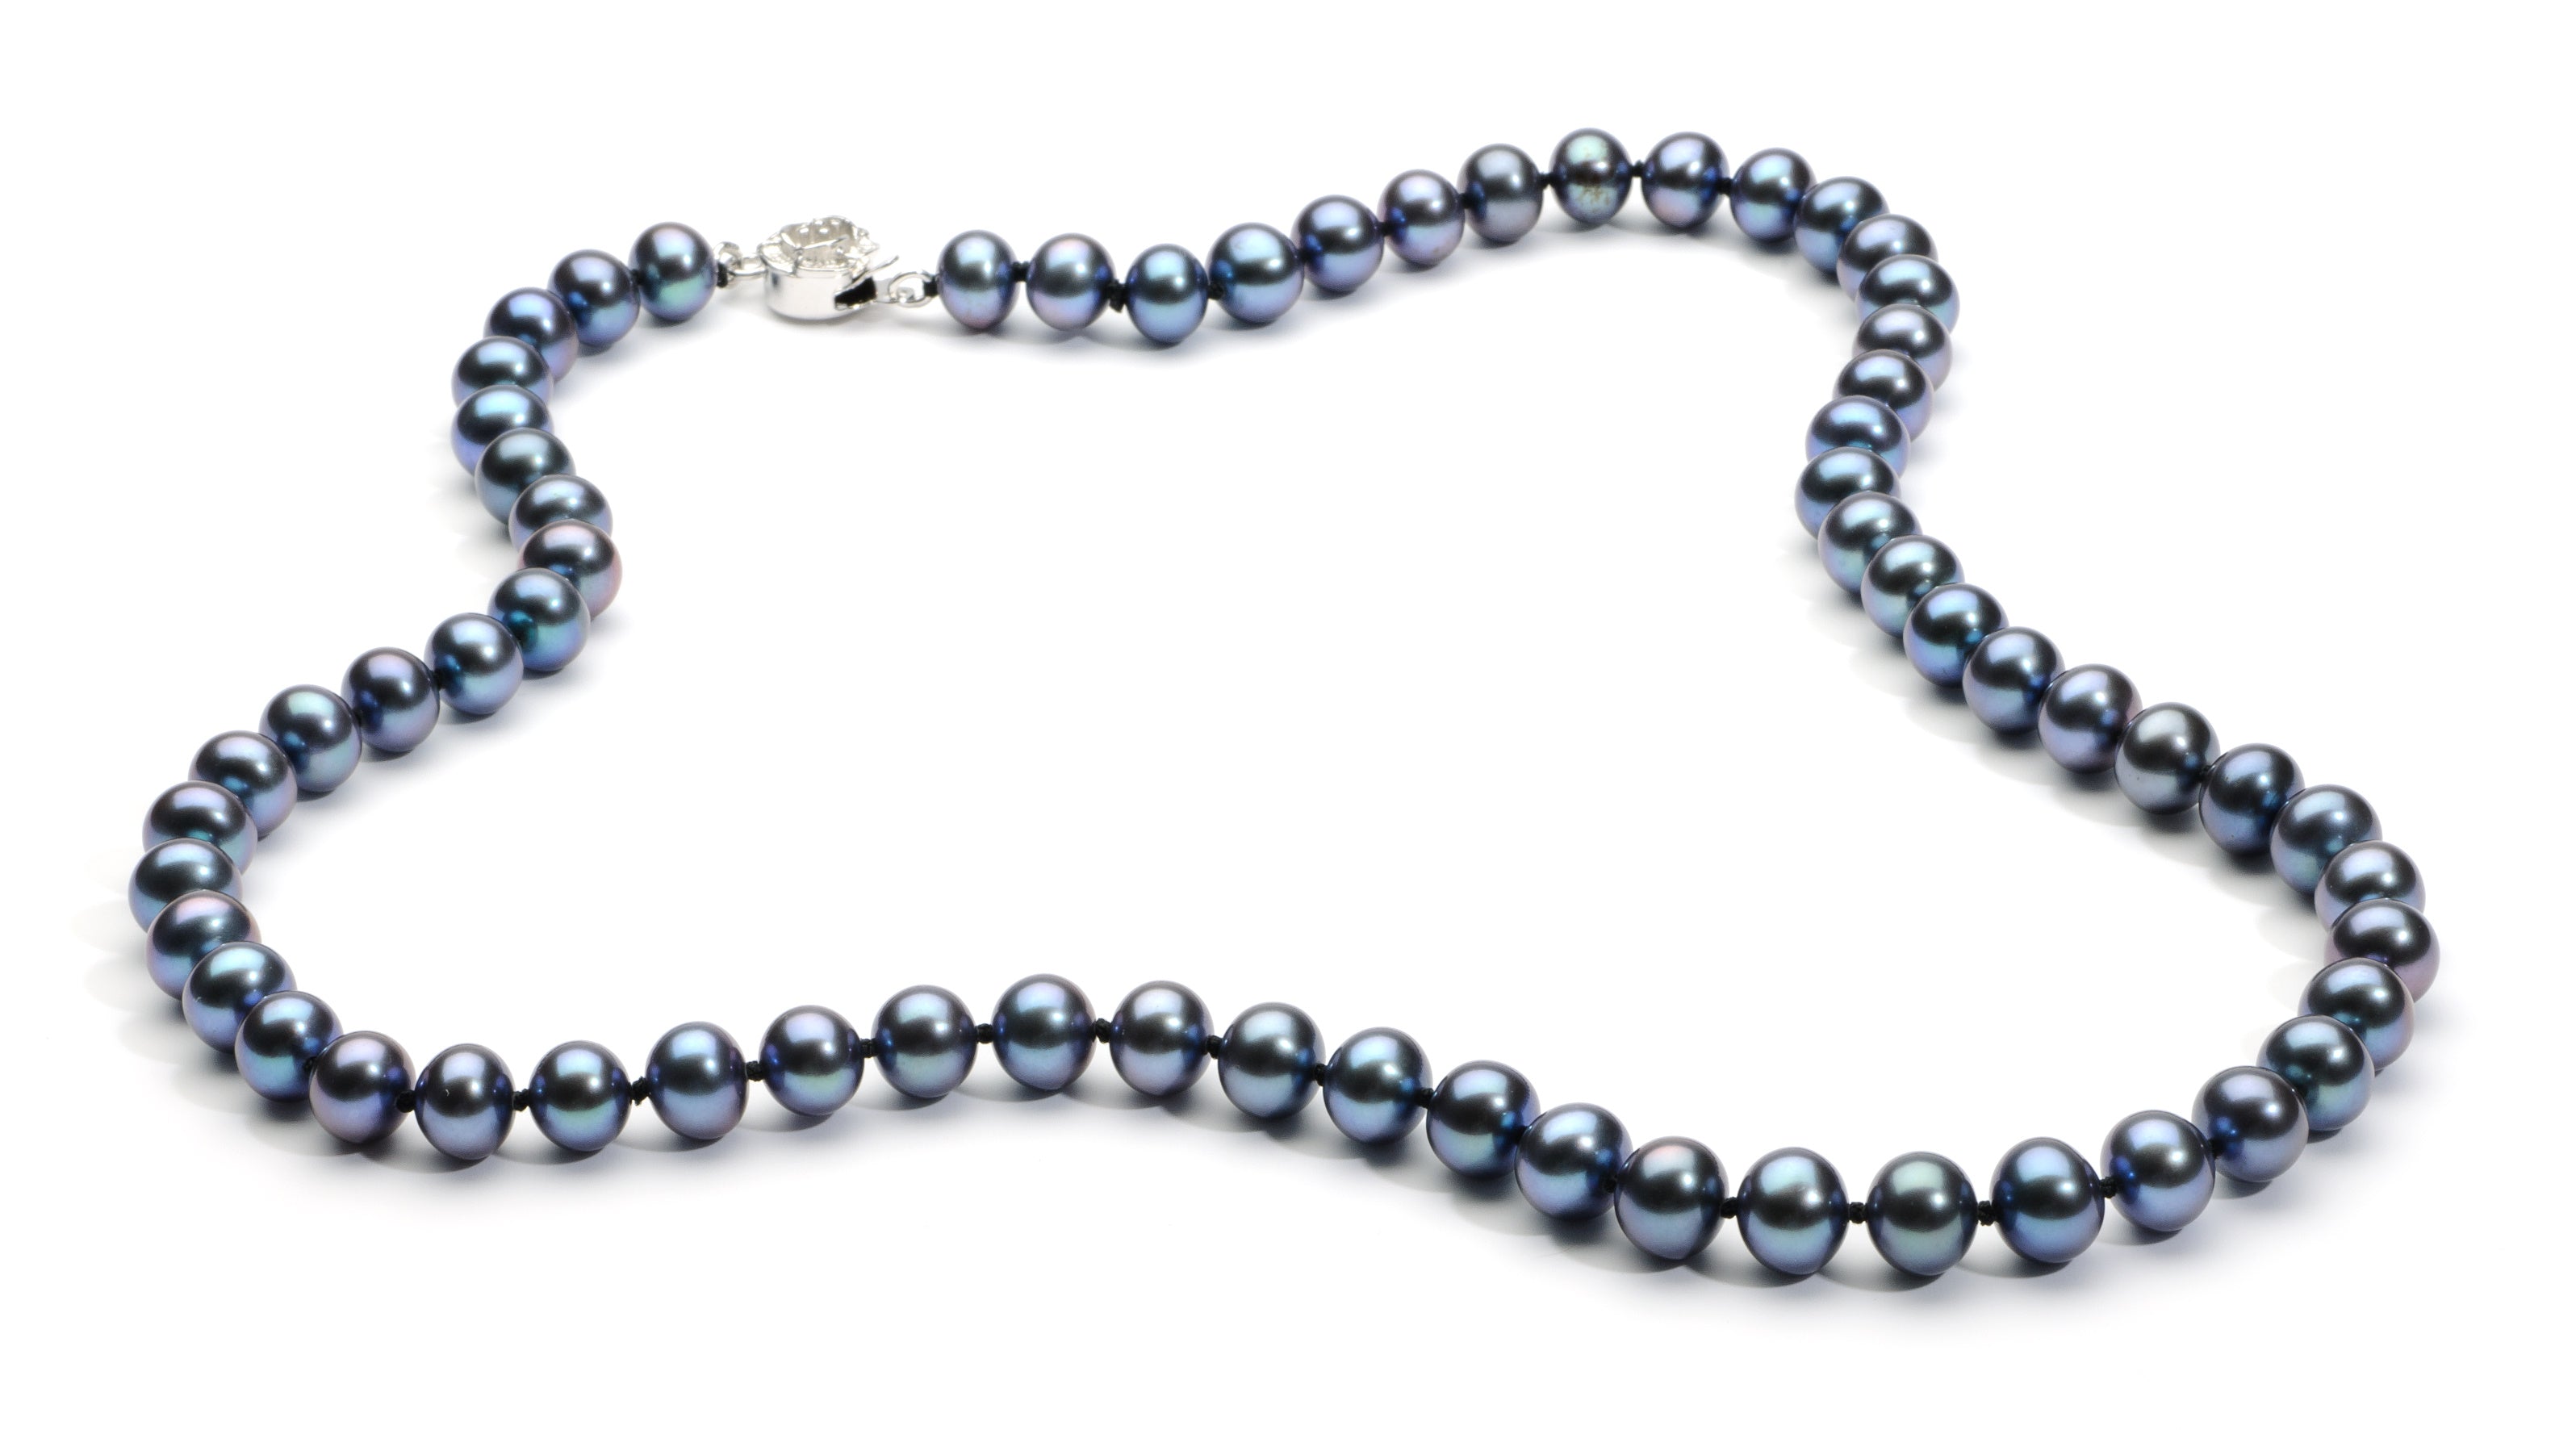 6.0-7.0 mm Black Freshwater Pearl Necklace